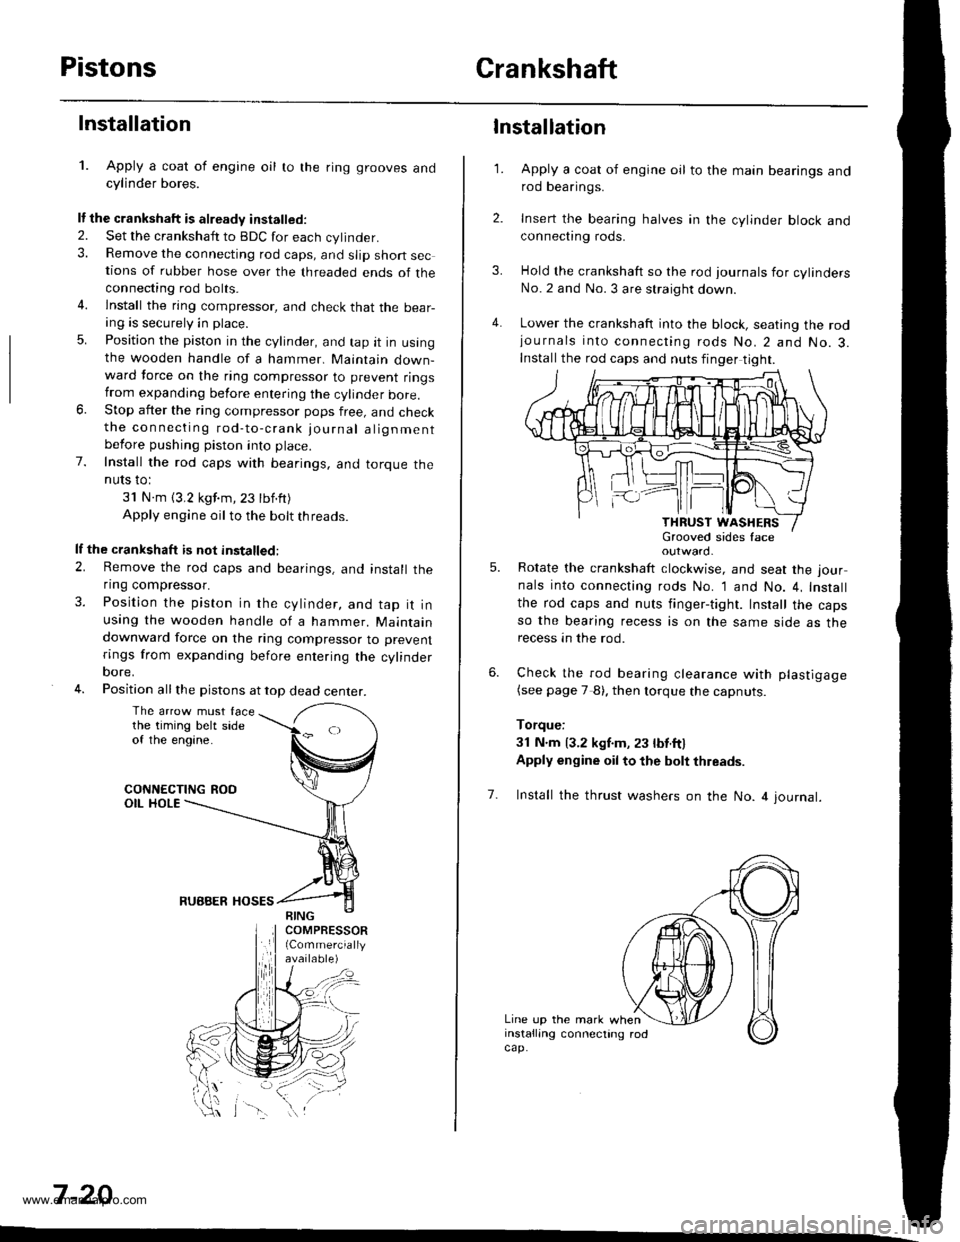 HONDA CR-V 2000 RD1-RD3 / 1.G Workshop Manual 
PistonsCrankshaft
Installation
1. Apply a coat of engine oil to the ring grooves andcylinder bores.
It the crankshaft is already installed.
2. Set the crankshatt to BDC for each cylinder.3. Remove th